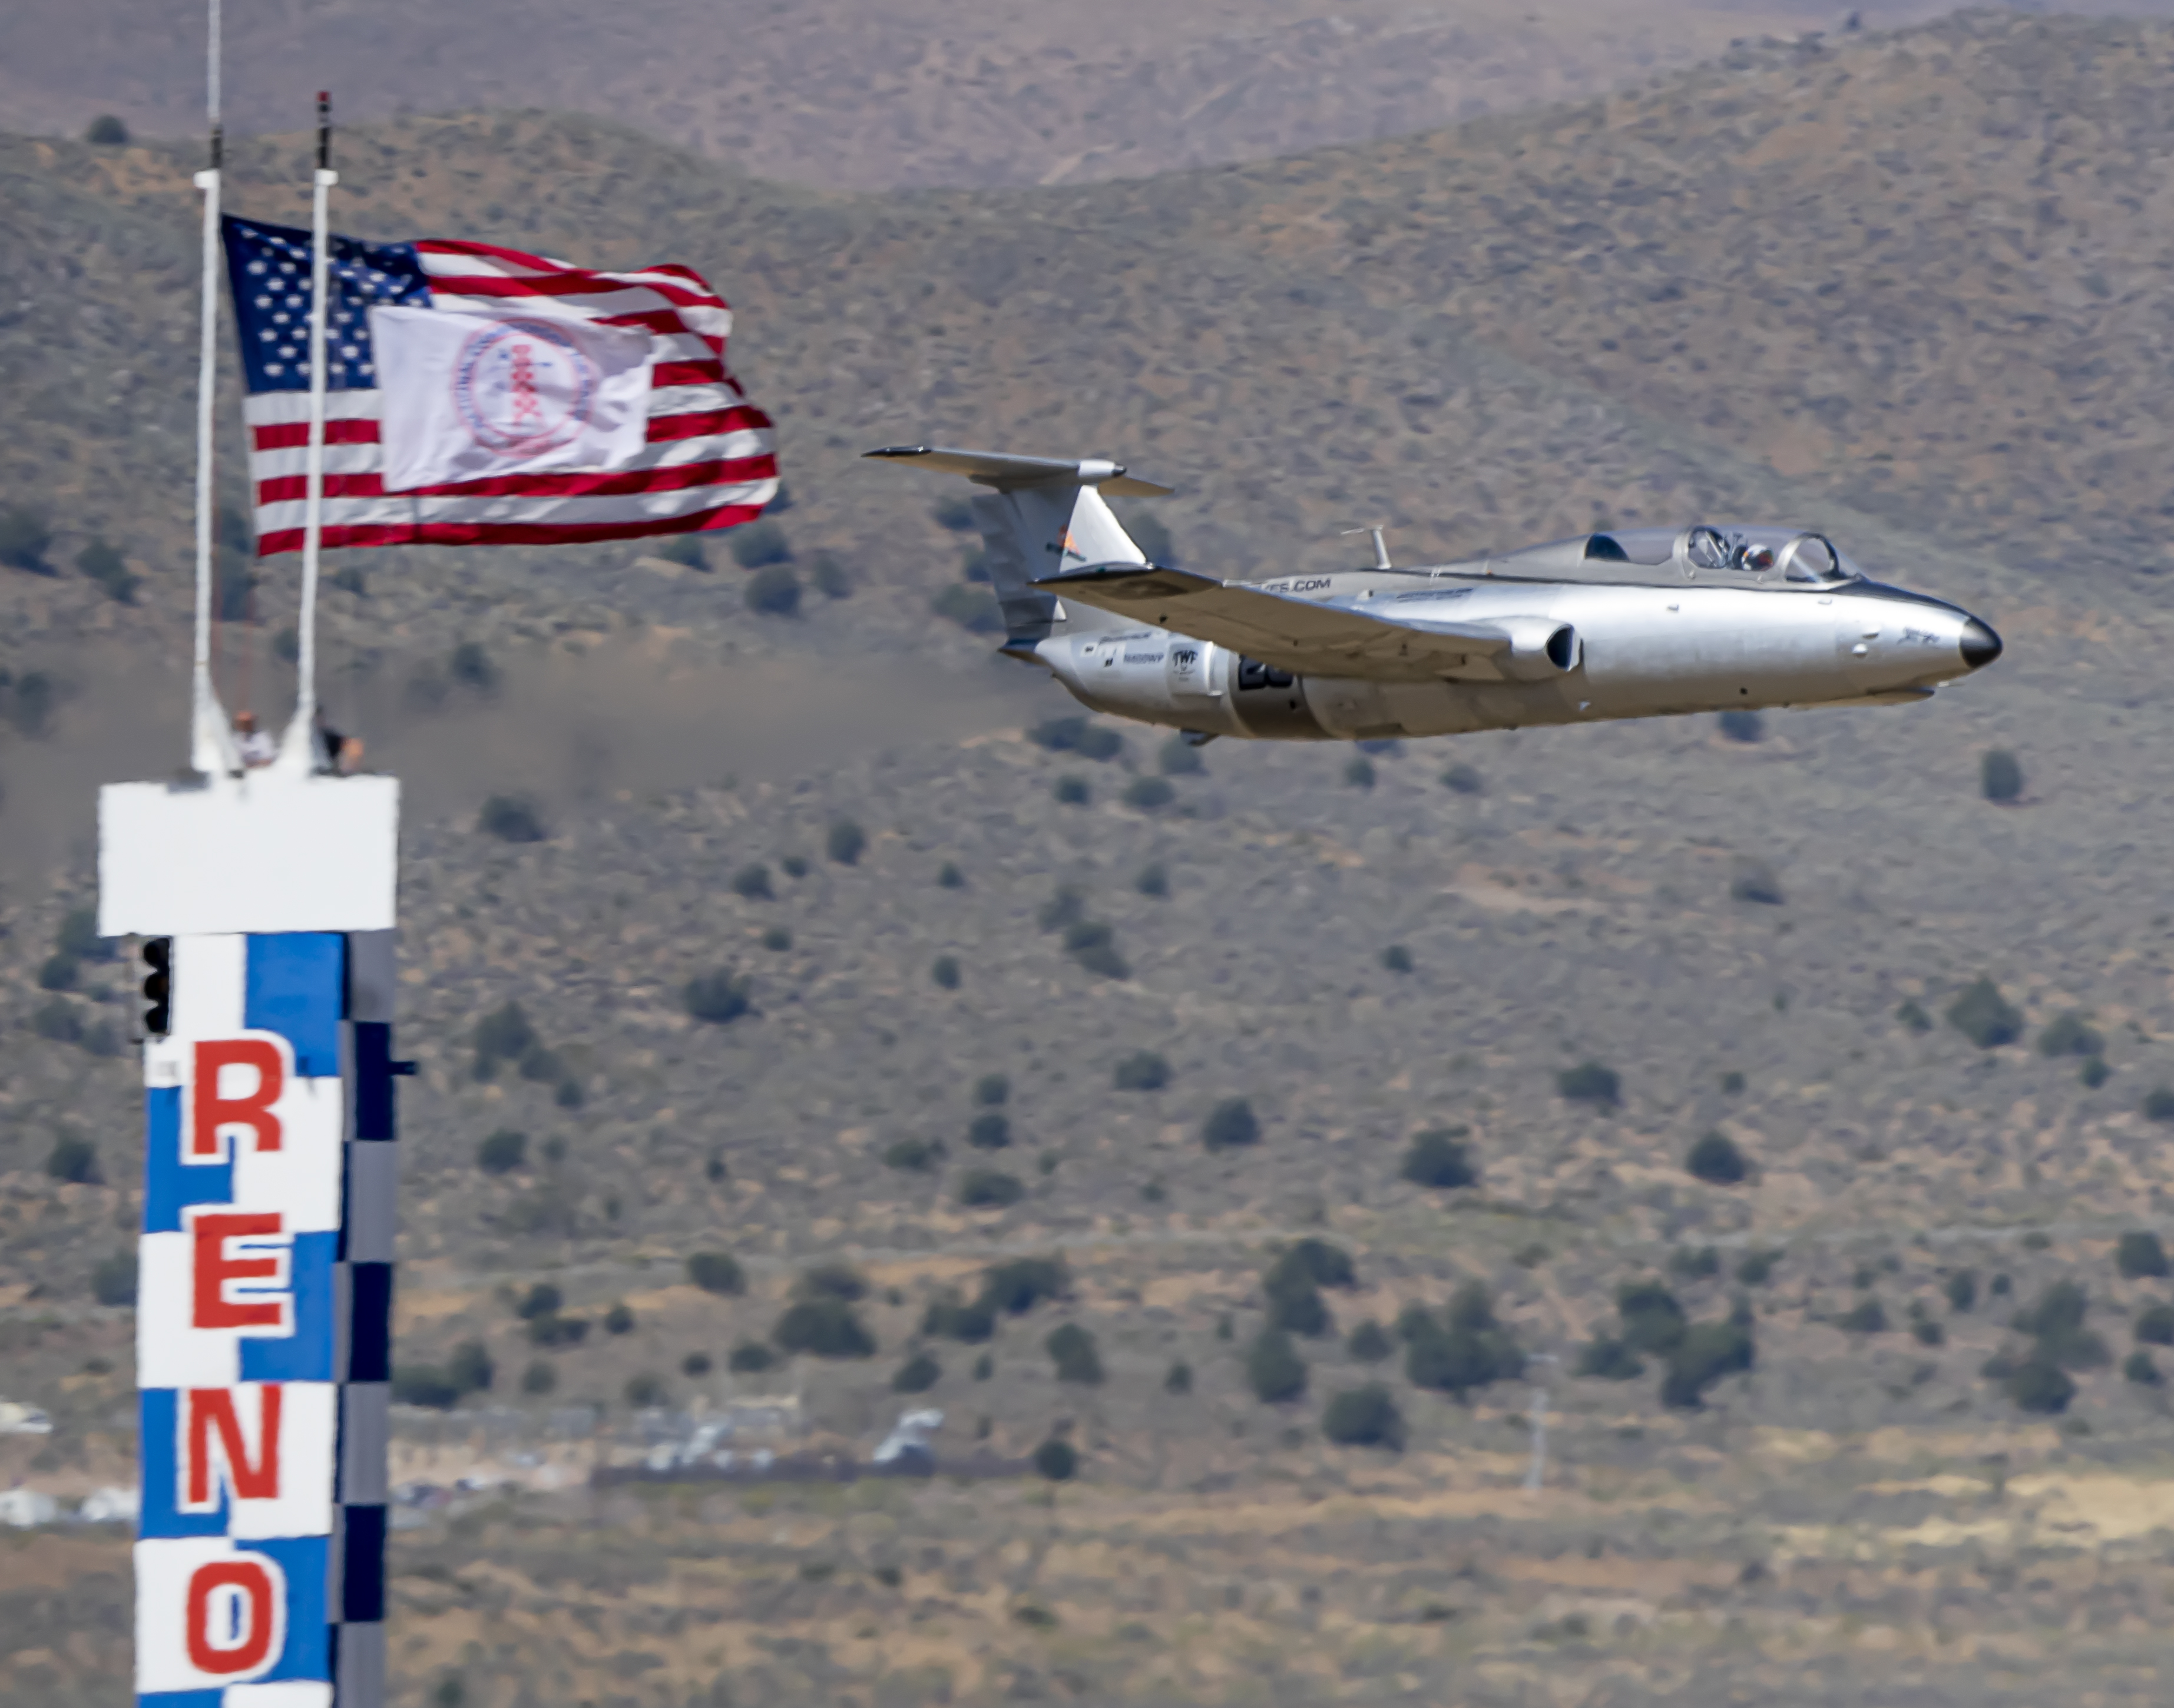 National Championship Air Races lands spot in top 10 in USA TODAY award contest